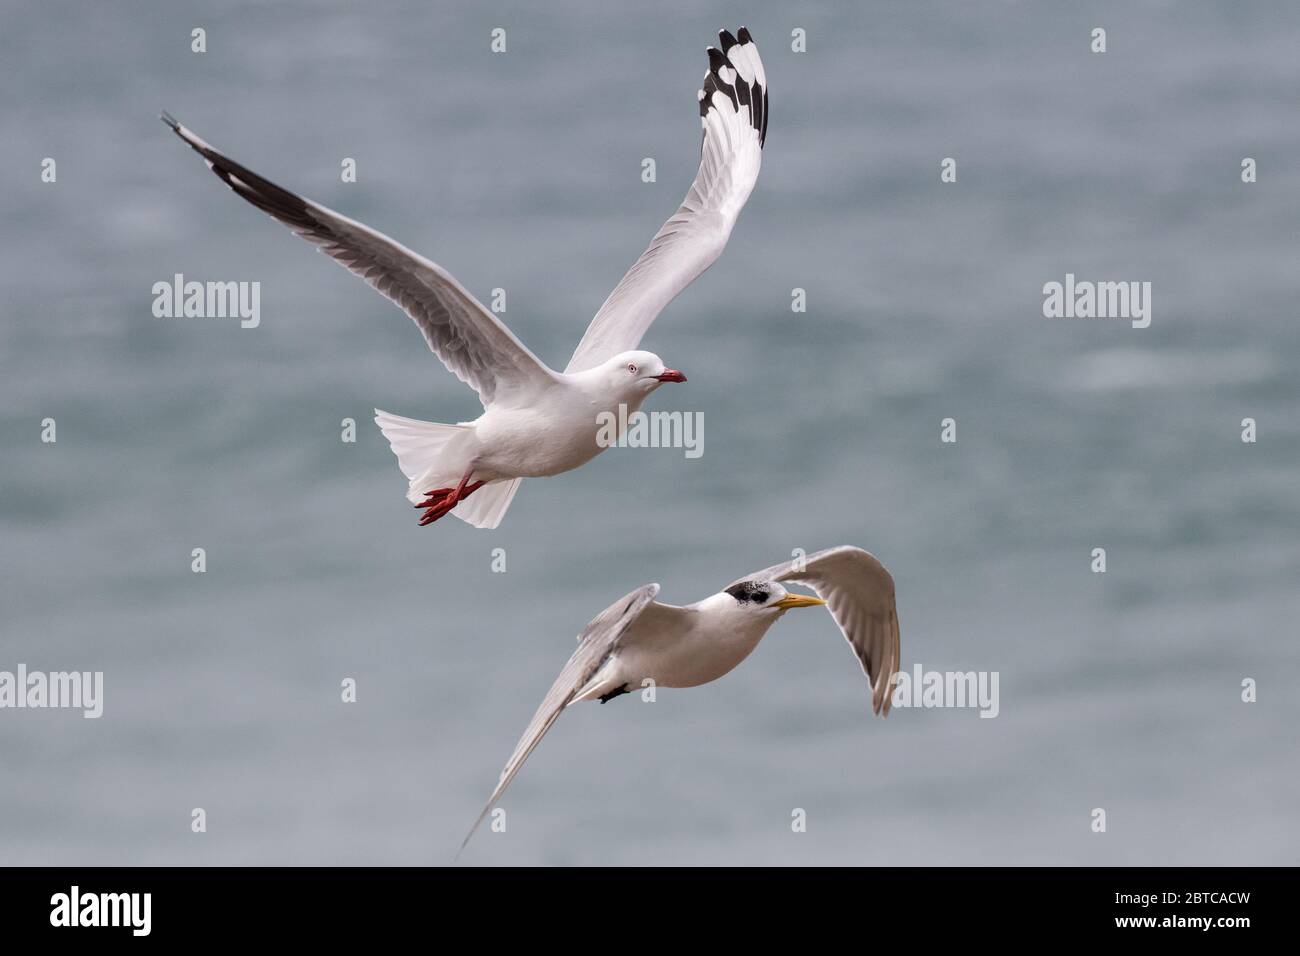 Silver Gull and Crested Tern in flight Stock Photo